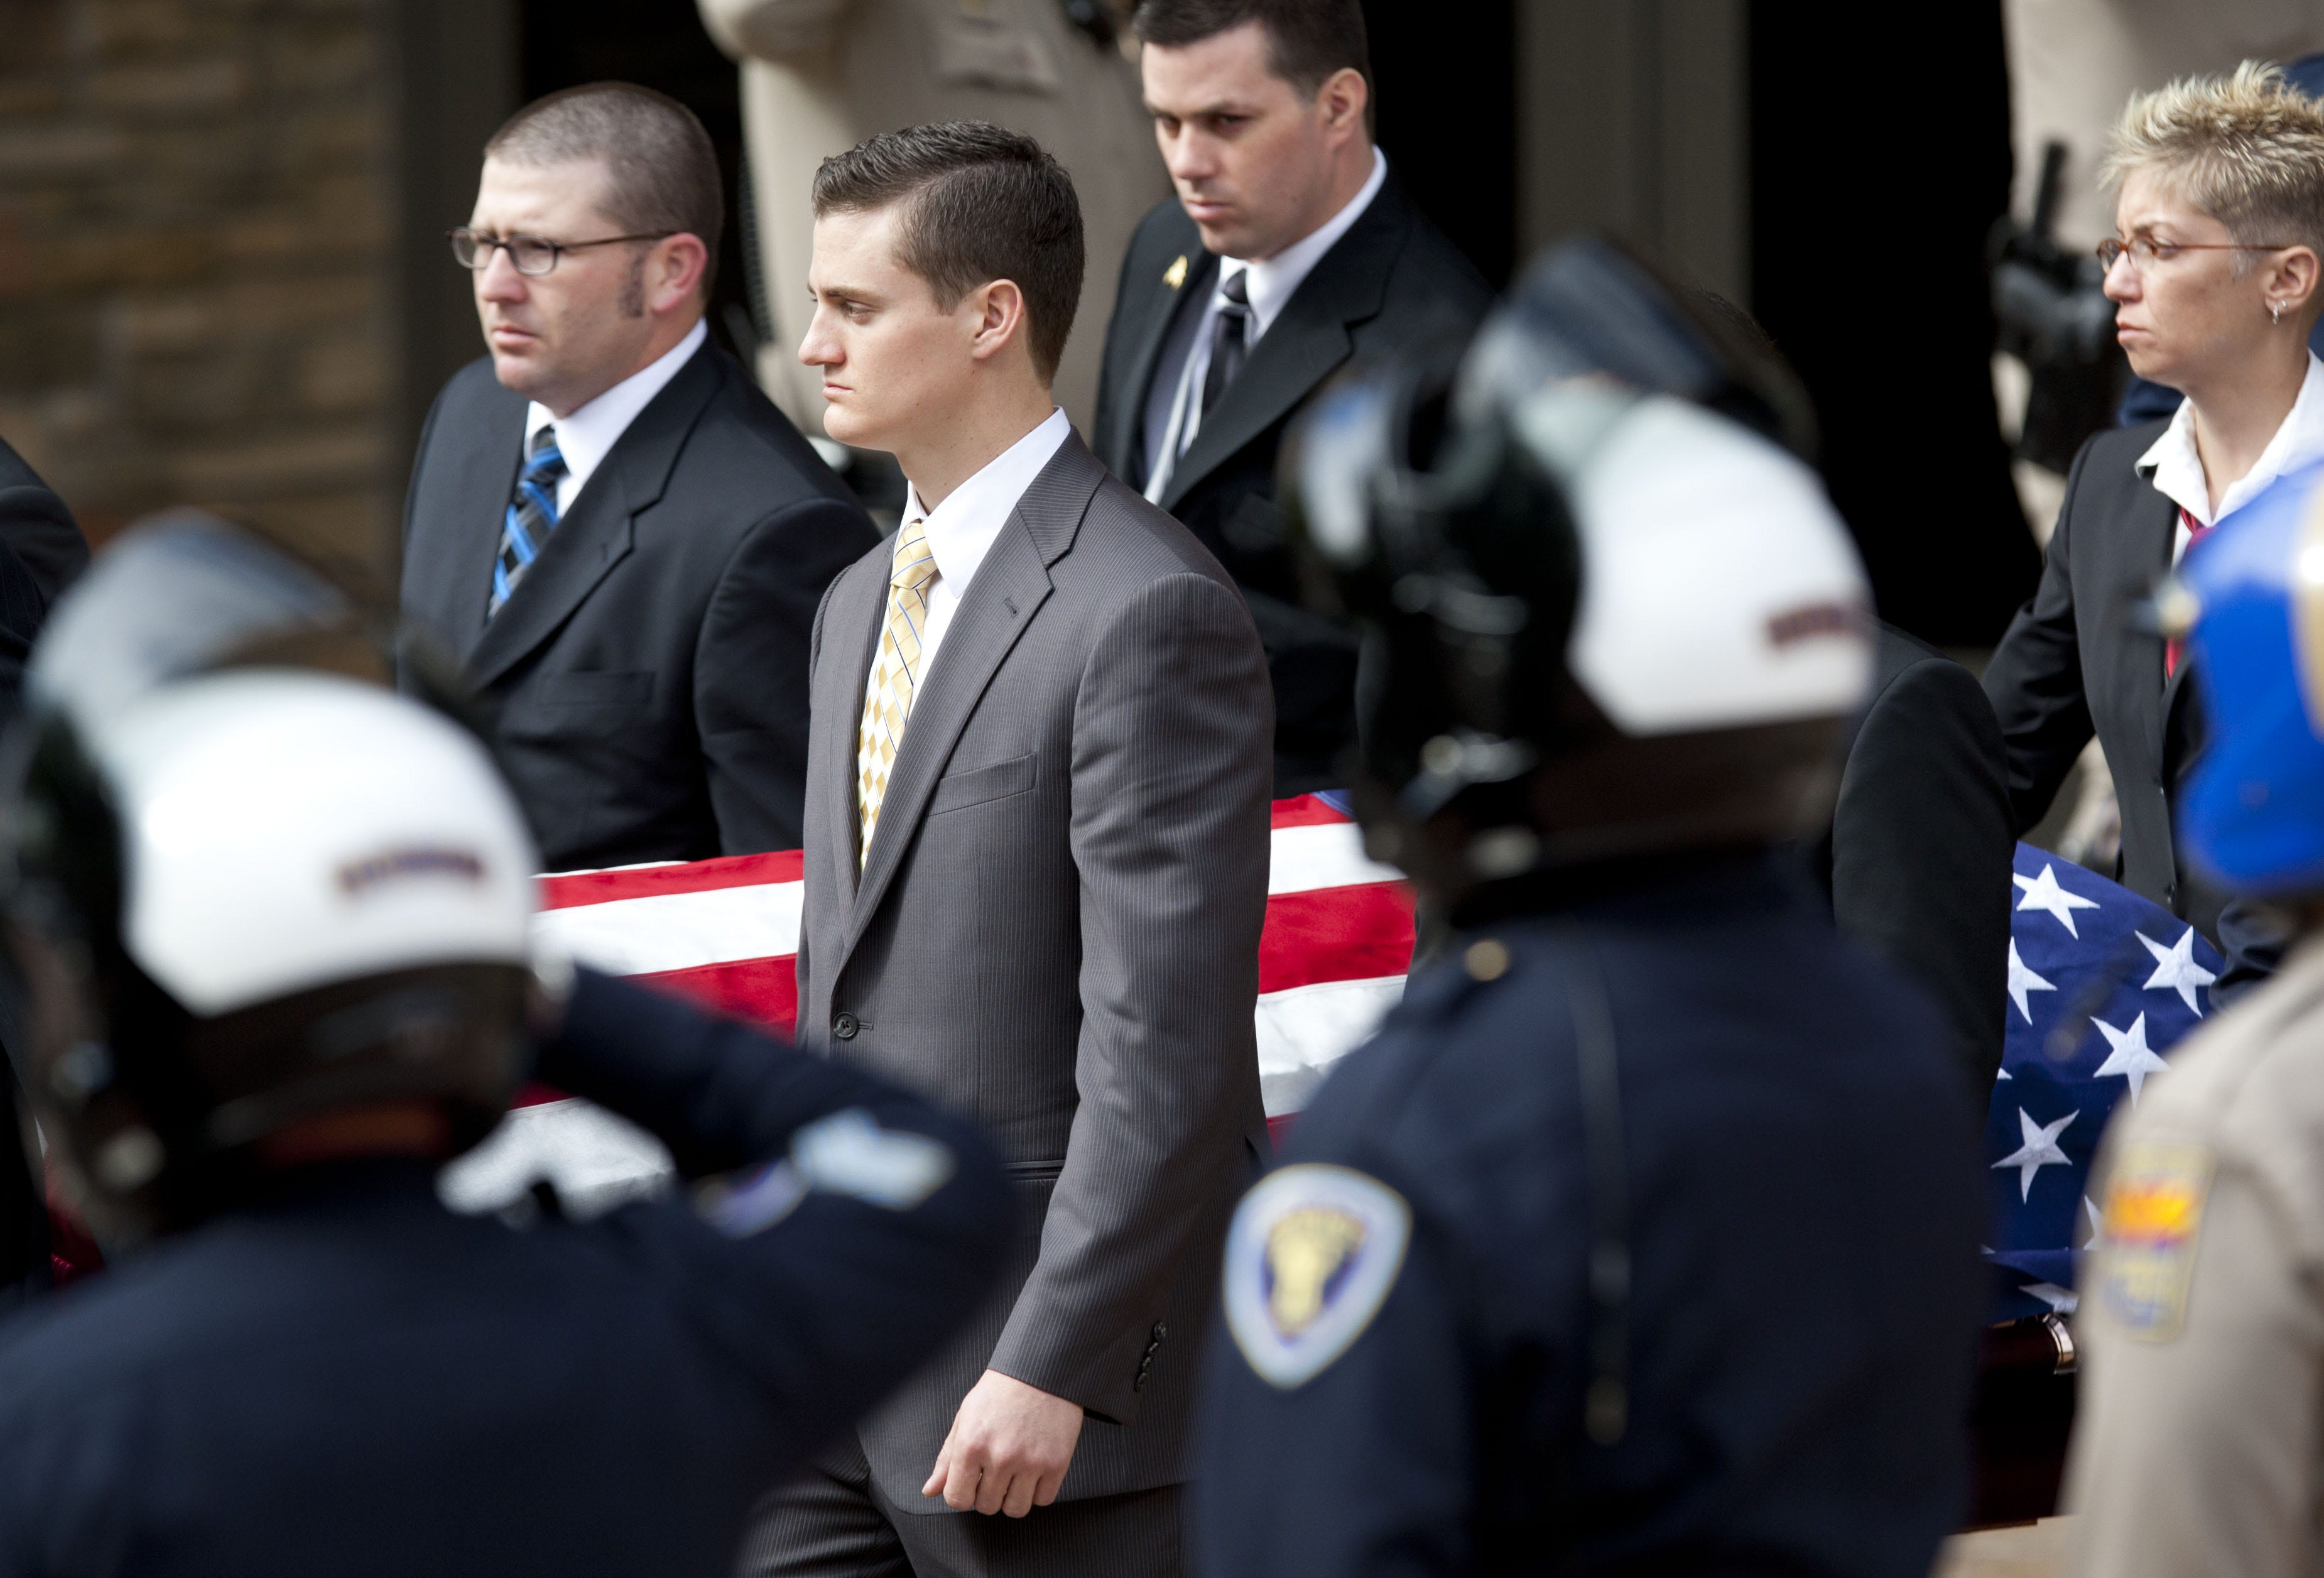 One of Bradley Jones' brother (center-left) pushes the flag-draped casket of fallen Glendale Police Officer Bradley Jones during the recessional for the funeral service of Glendale Police Officer Bradley Jones at Christ's Church of the Valley in Peoria on Friday, November 4, 2011.